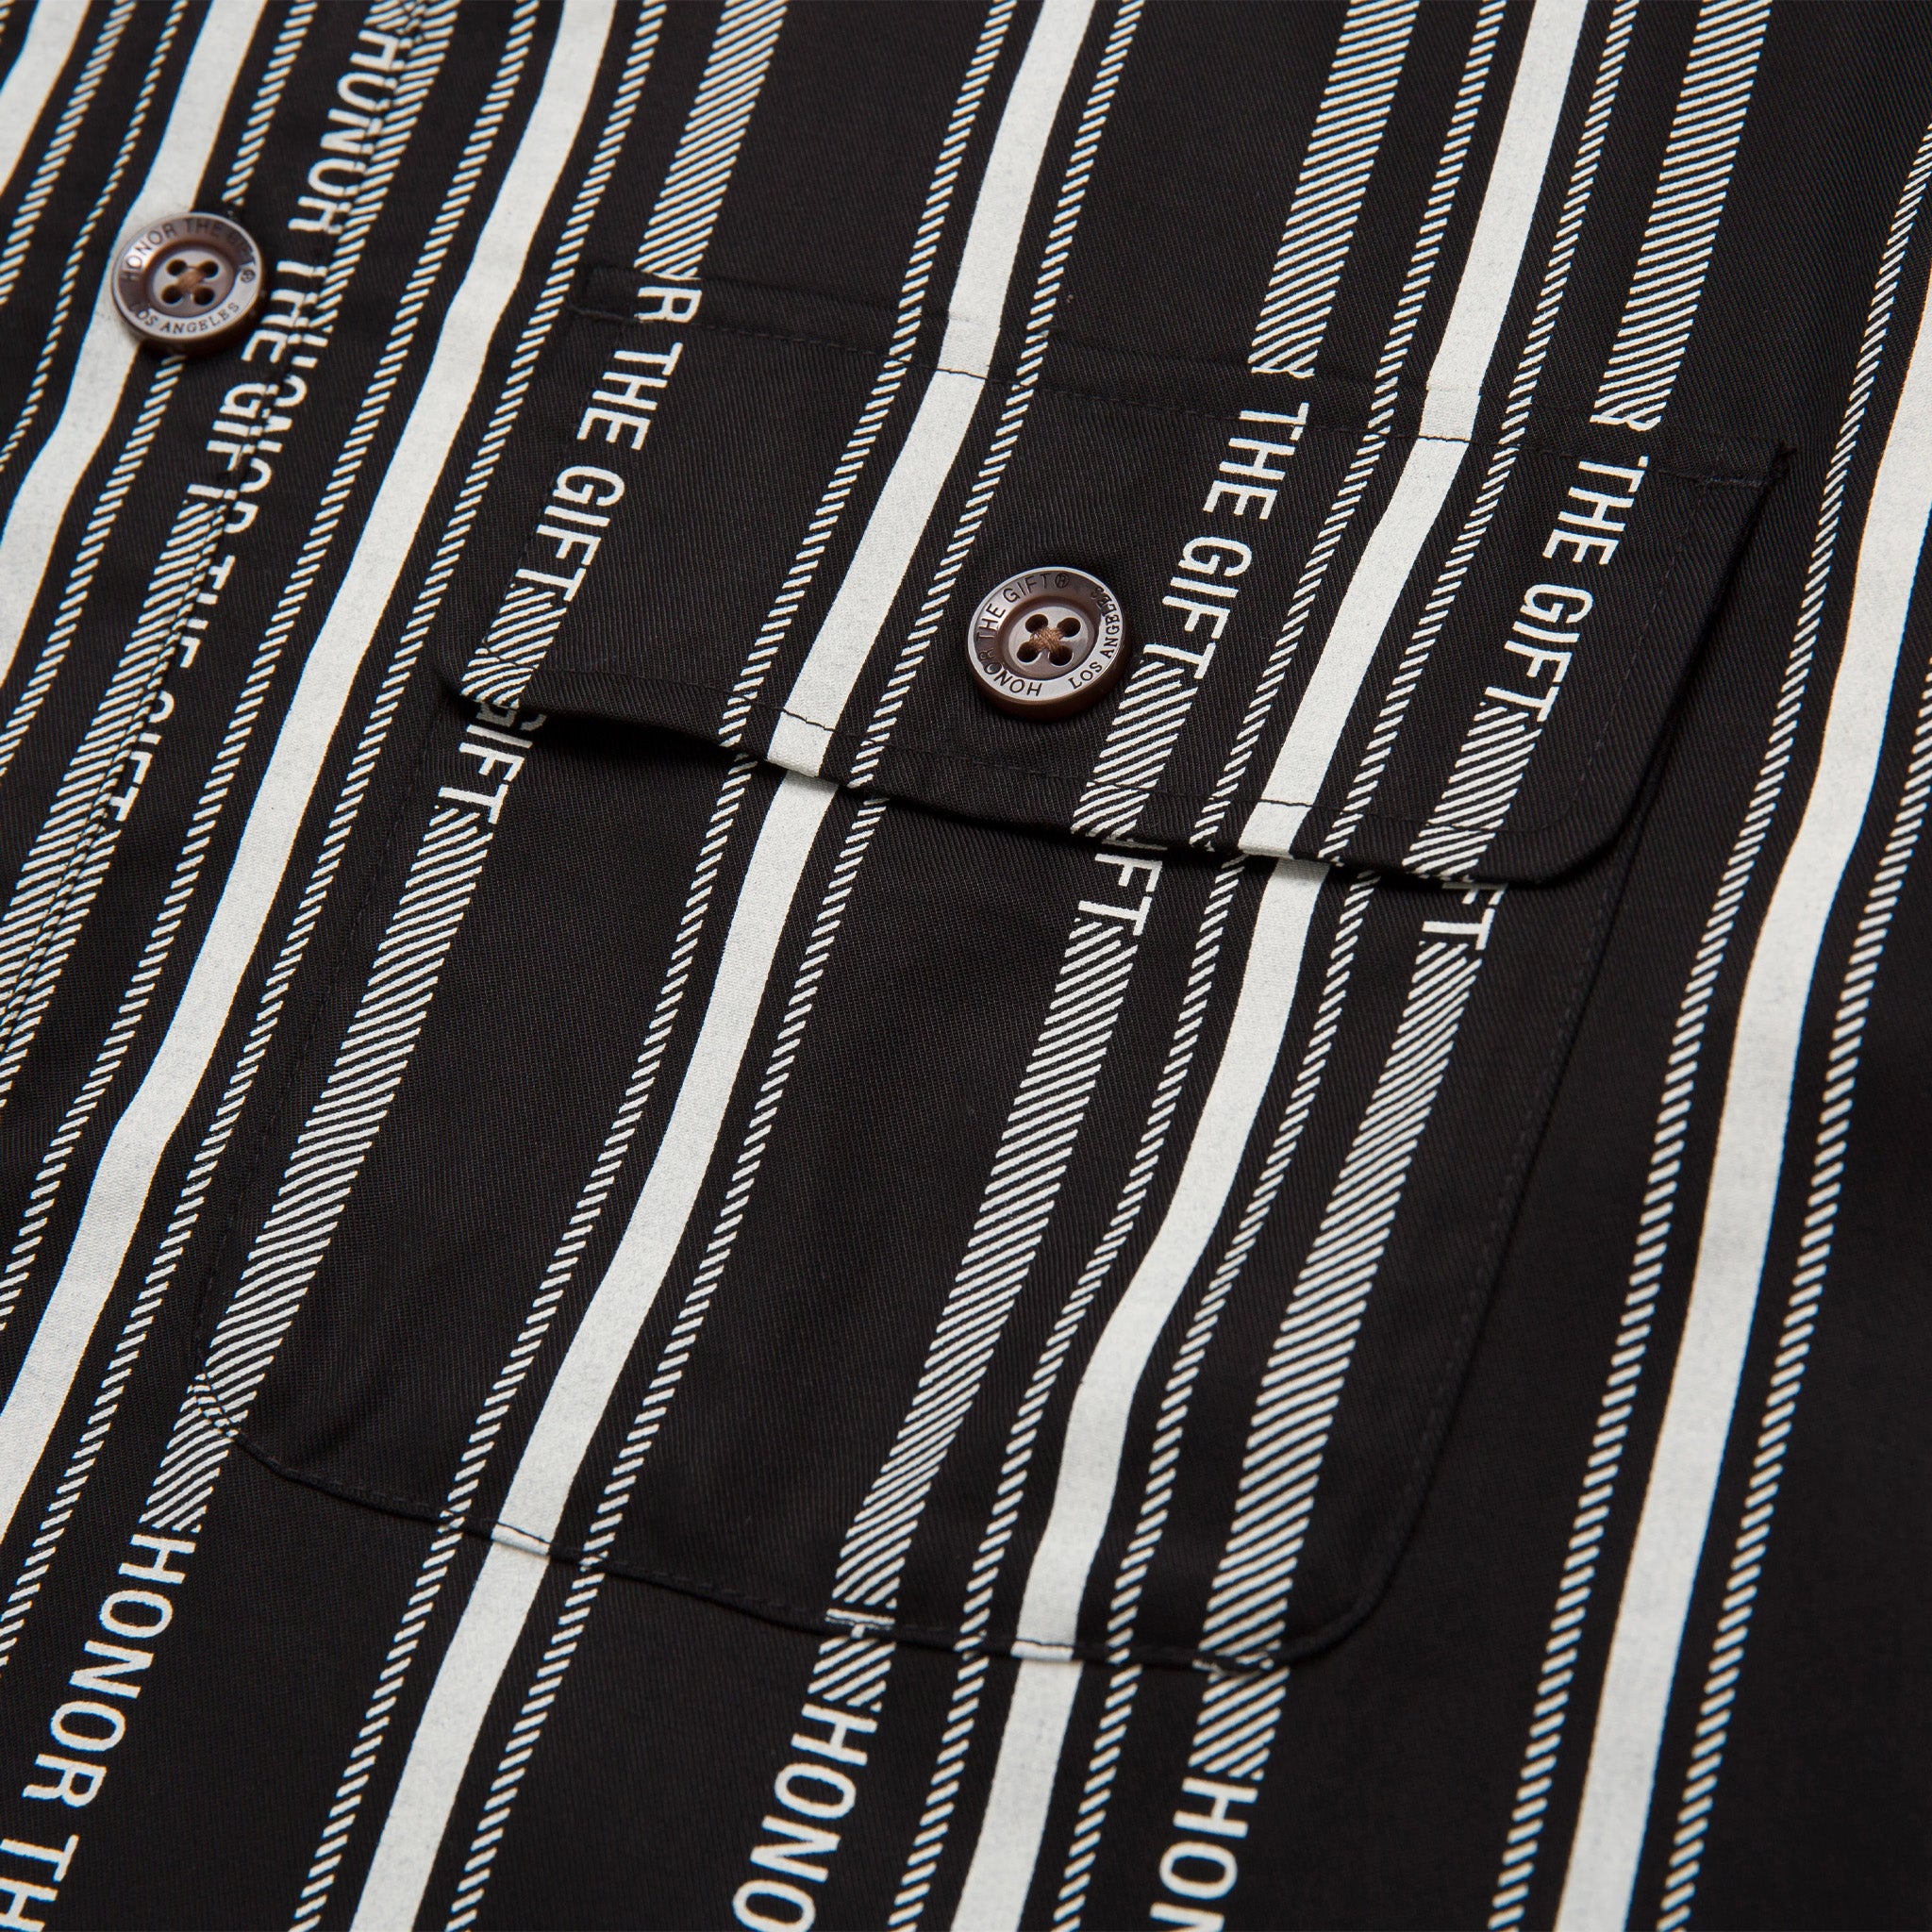 Honor The Gift Honor Stripe Button Up (Black) - August Shop